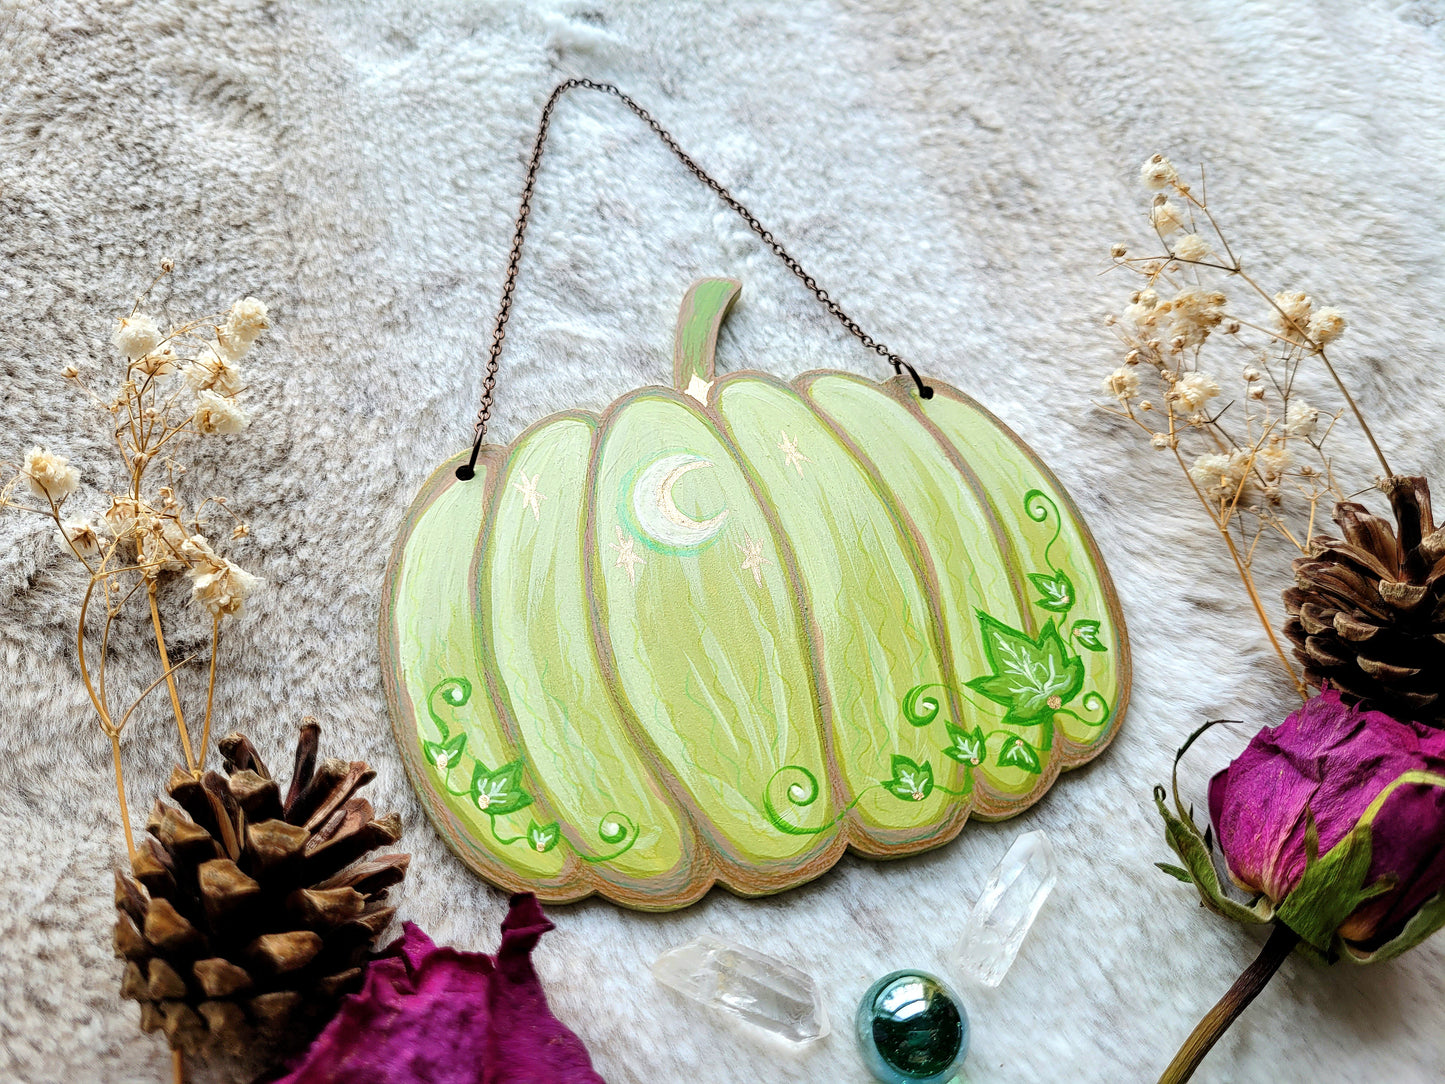 Original painted spring pumpkin - Green - One of a kind handmade wall hanging by Grace Moth